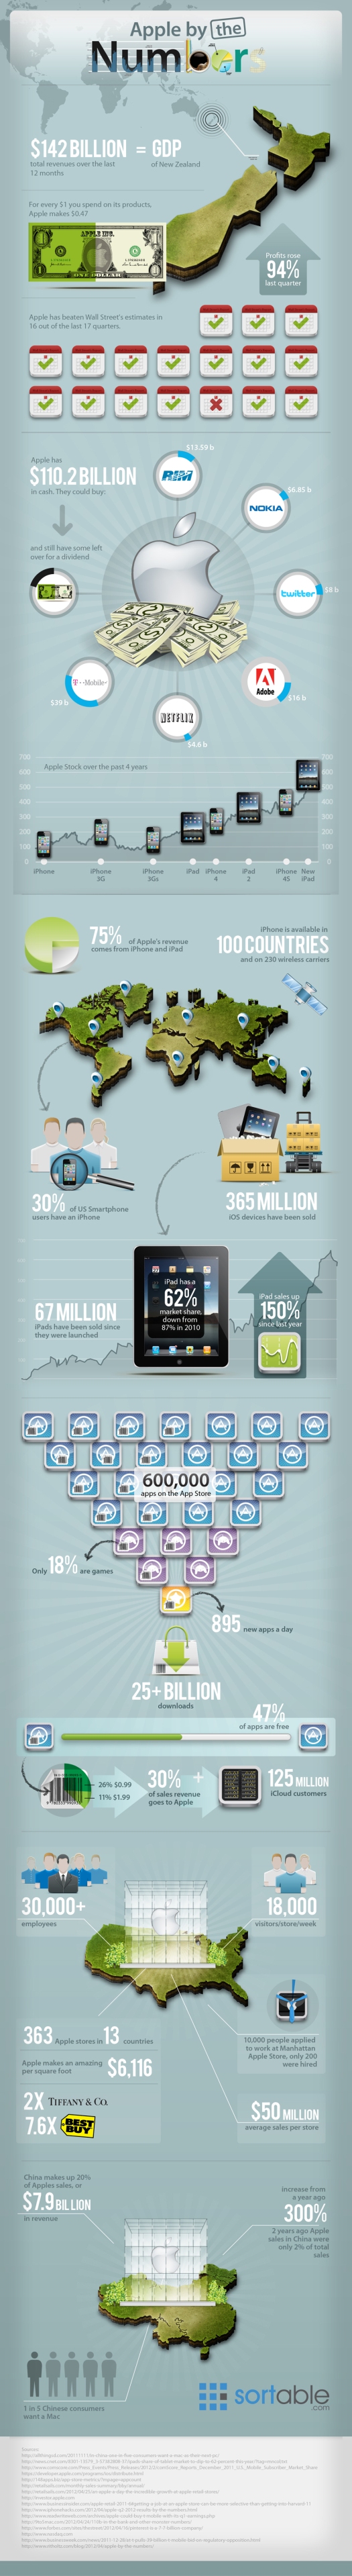 Apple by the Numbers